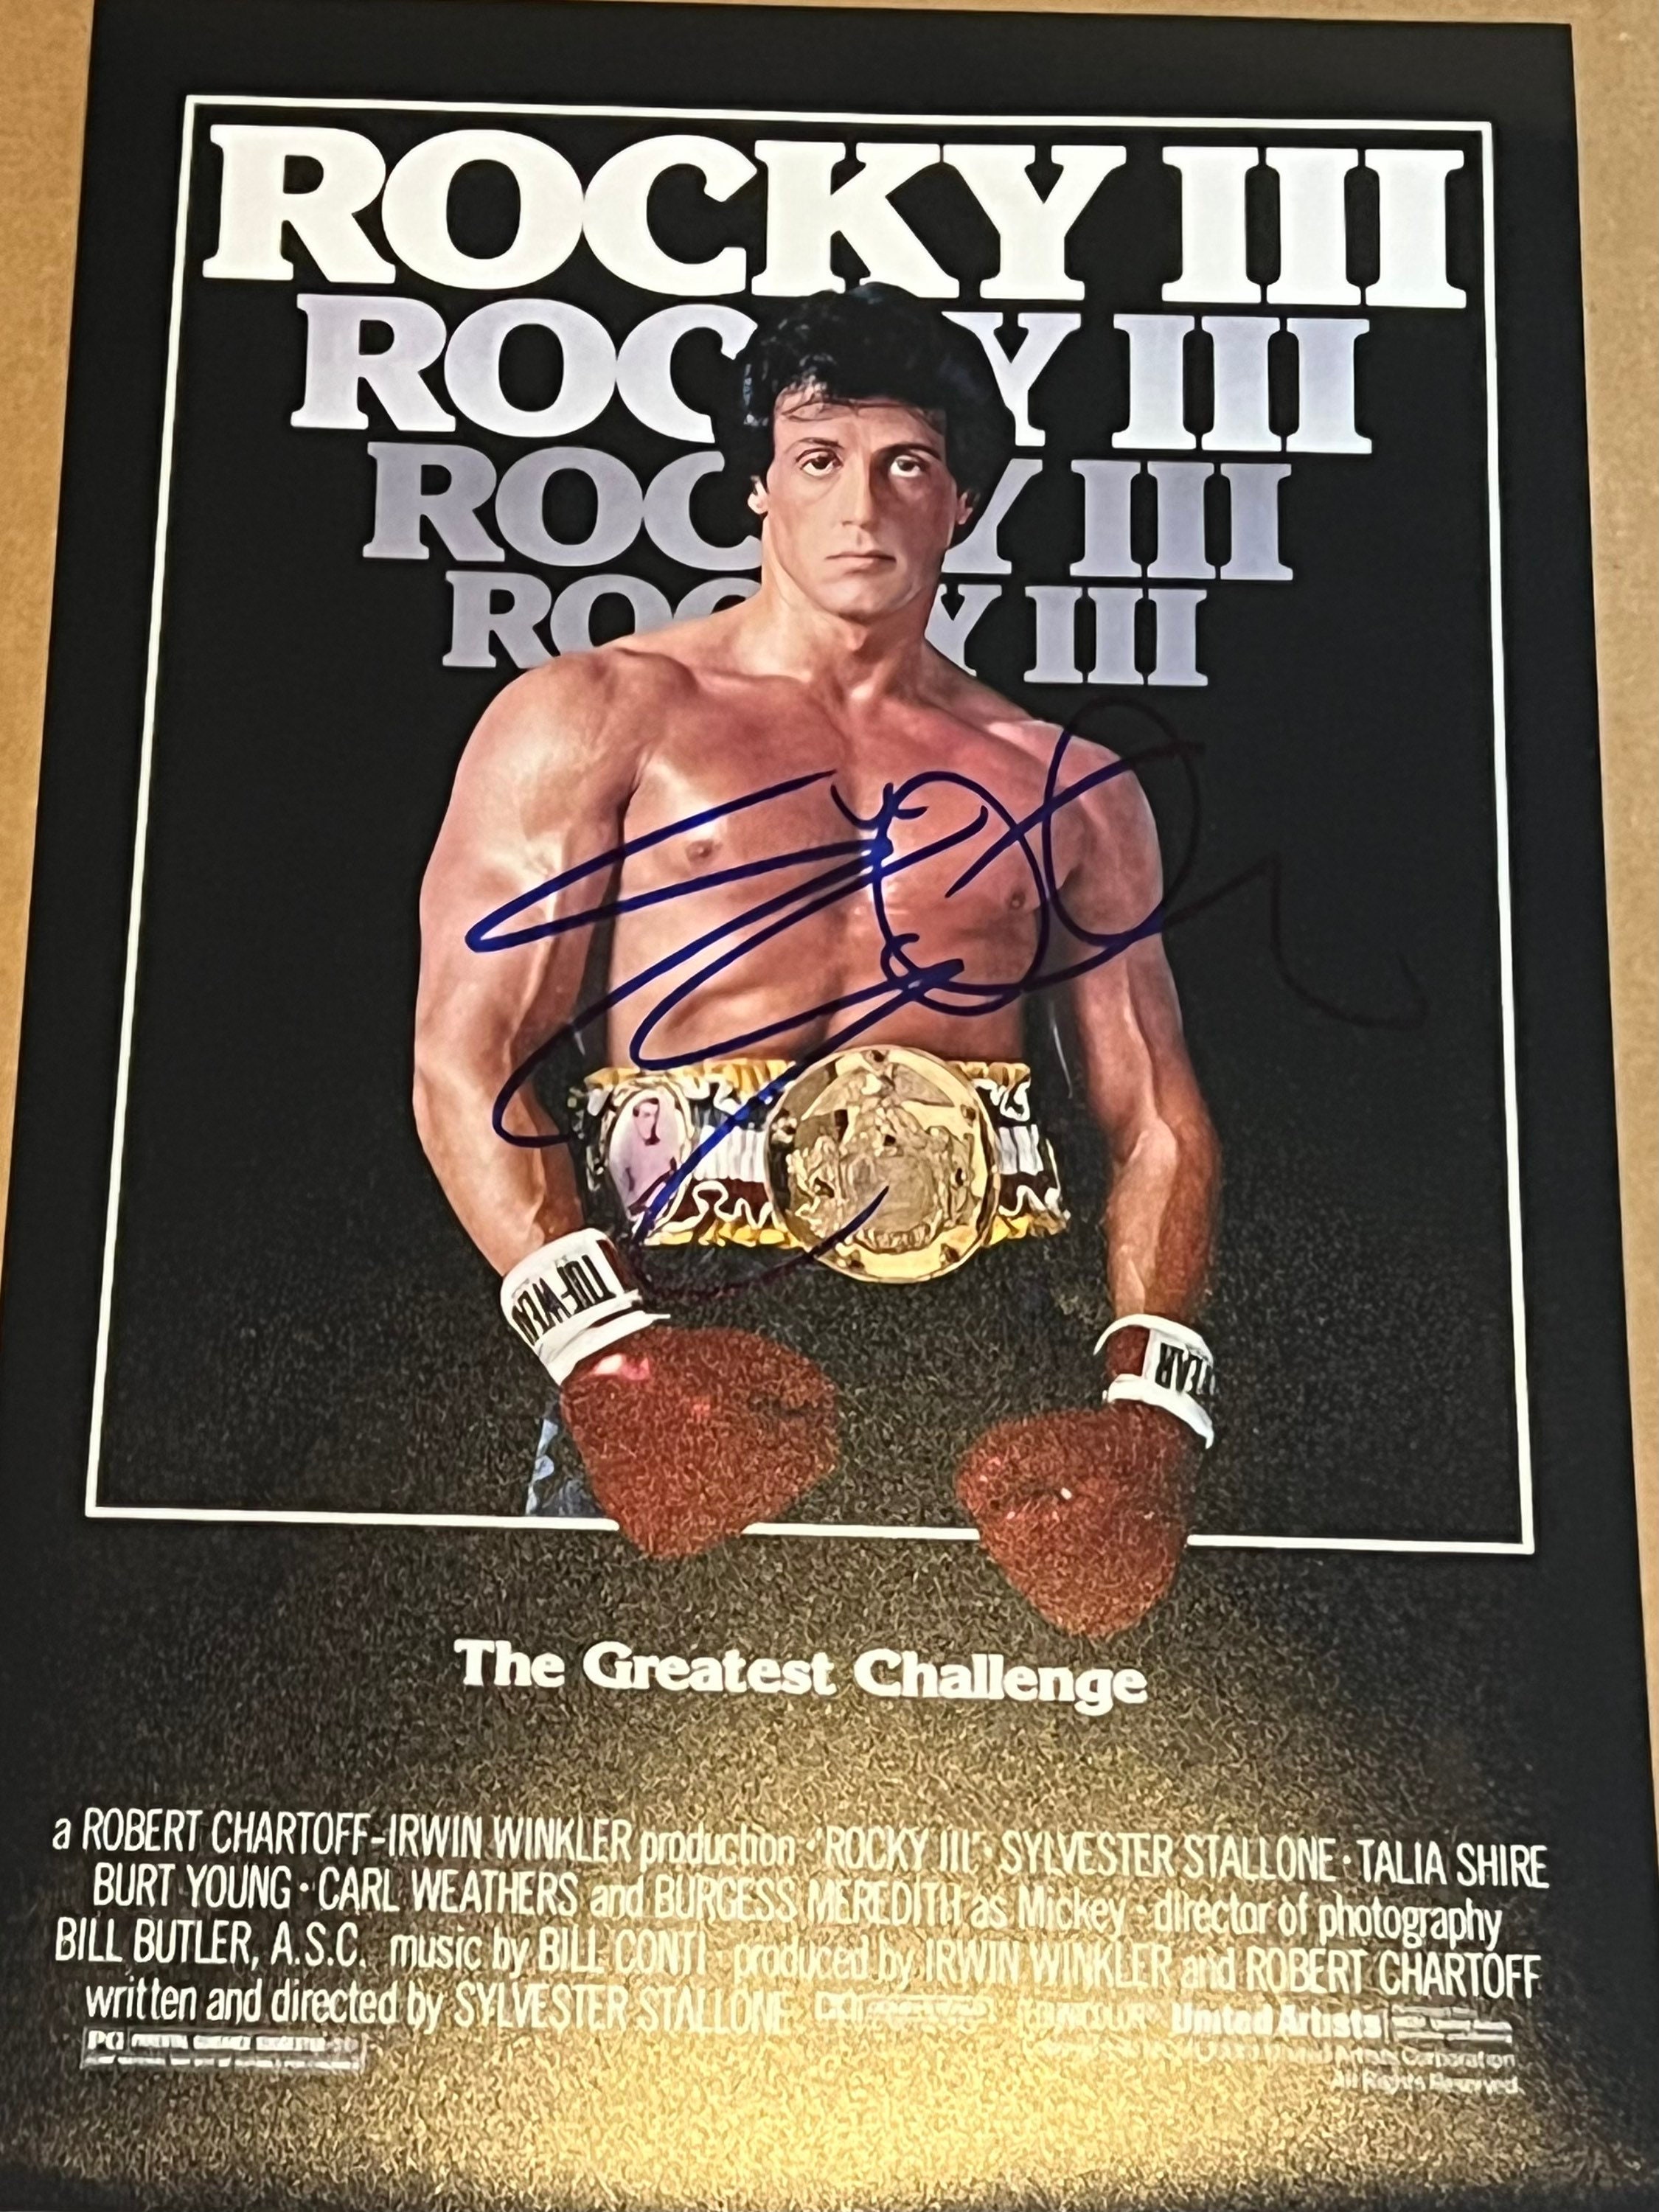 Rocky A3 Poster Rocky III Boxing Poster Rocky Balboa 